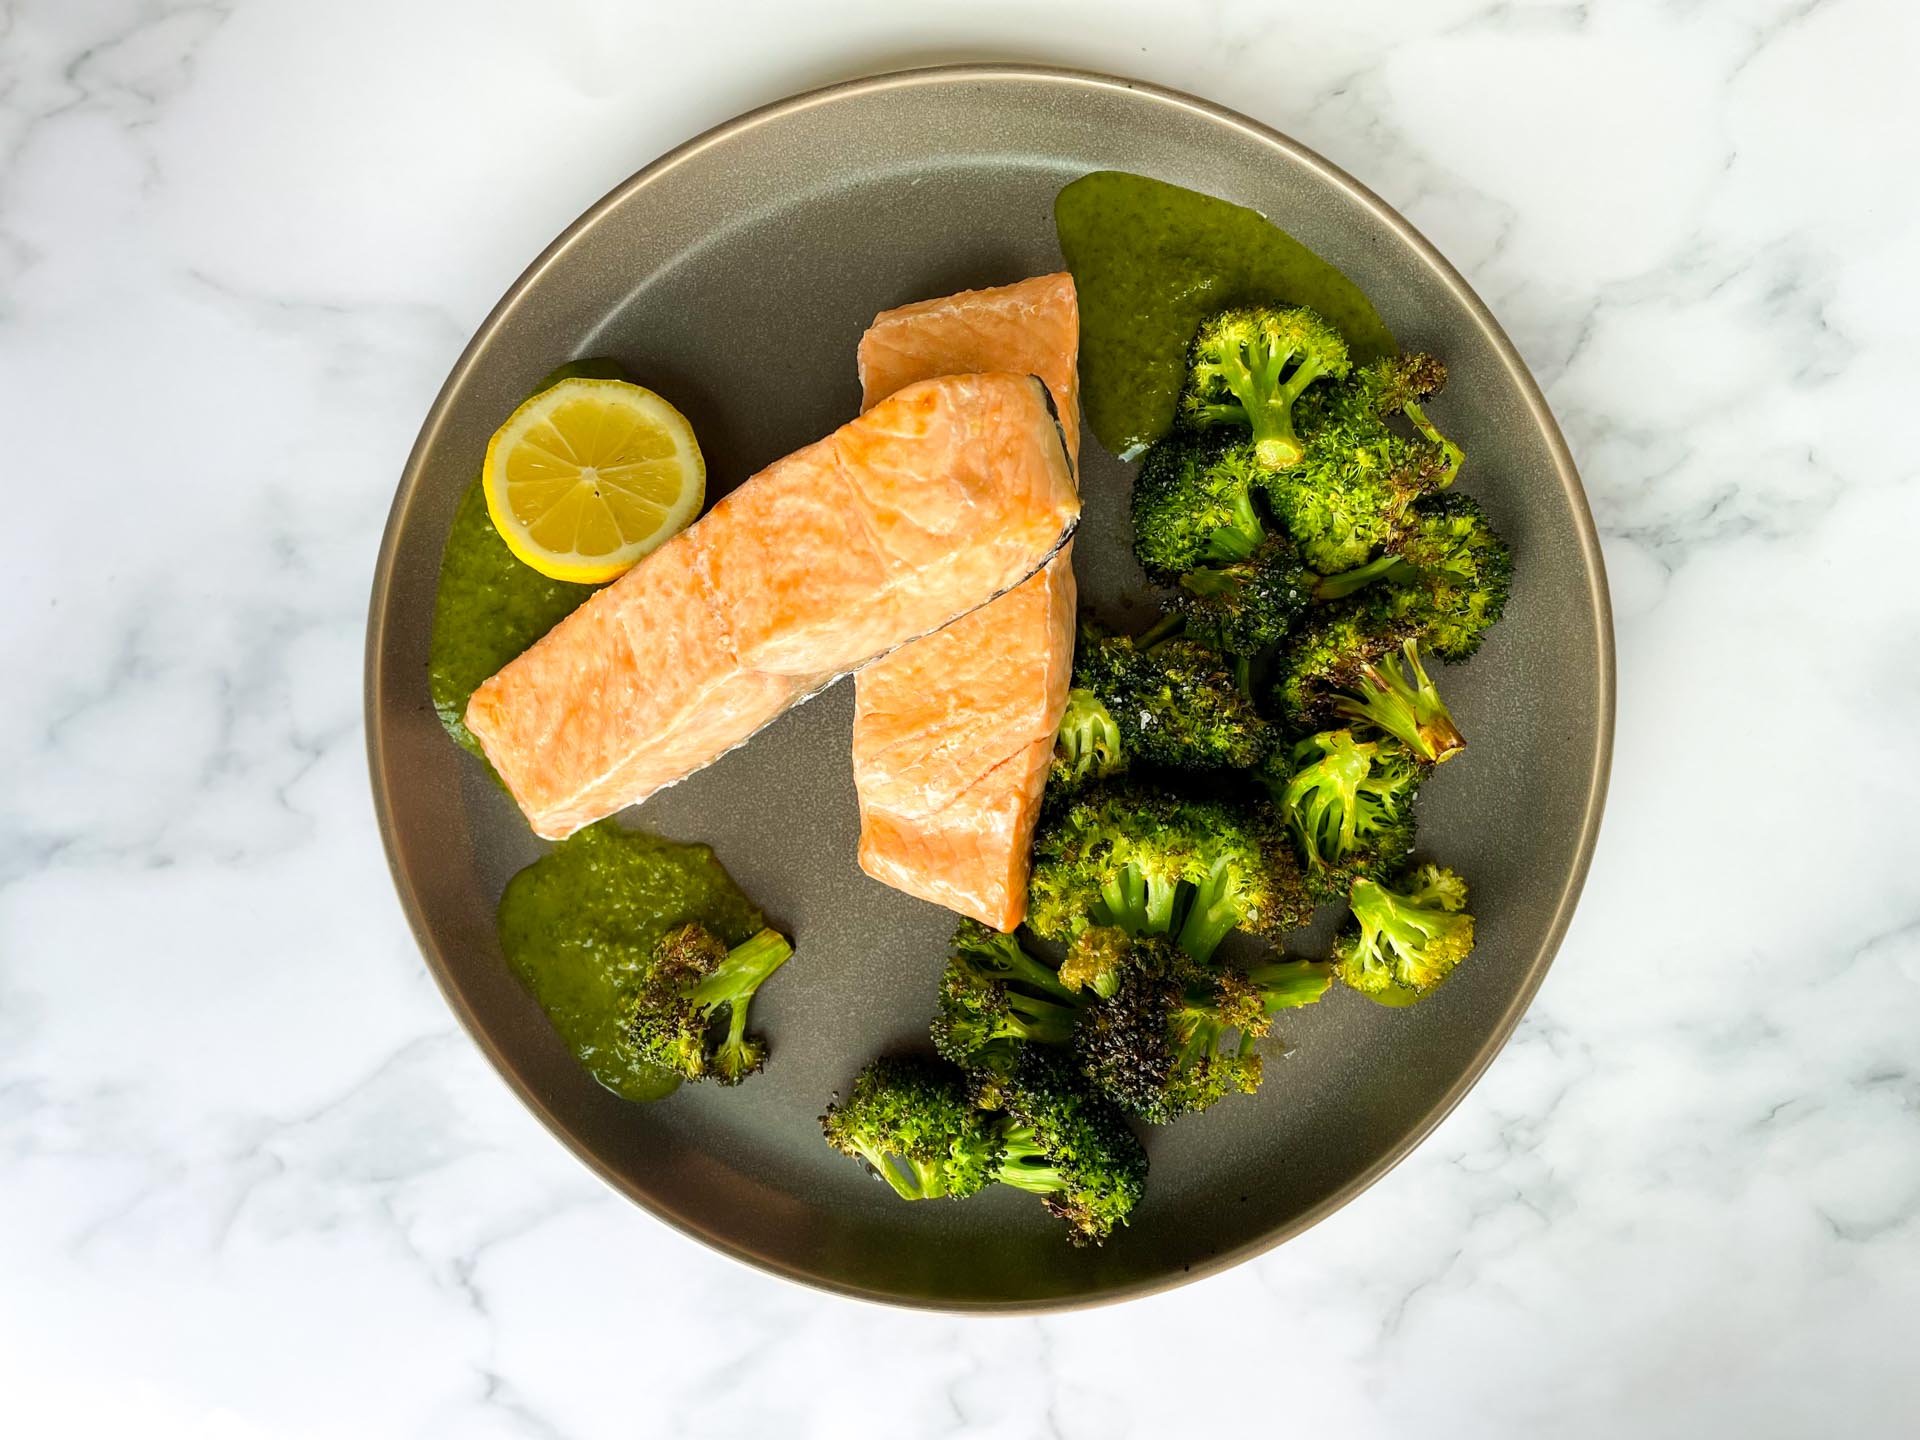 Oven baked salmon with chimichurri and broccoli